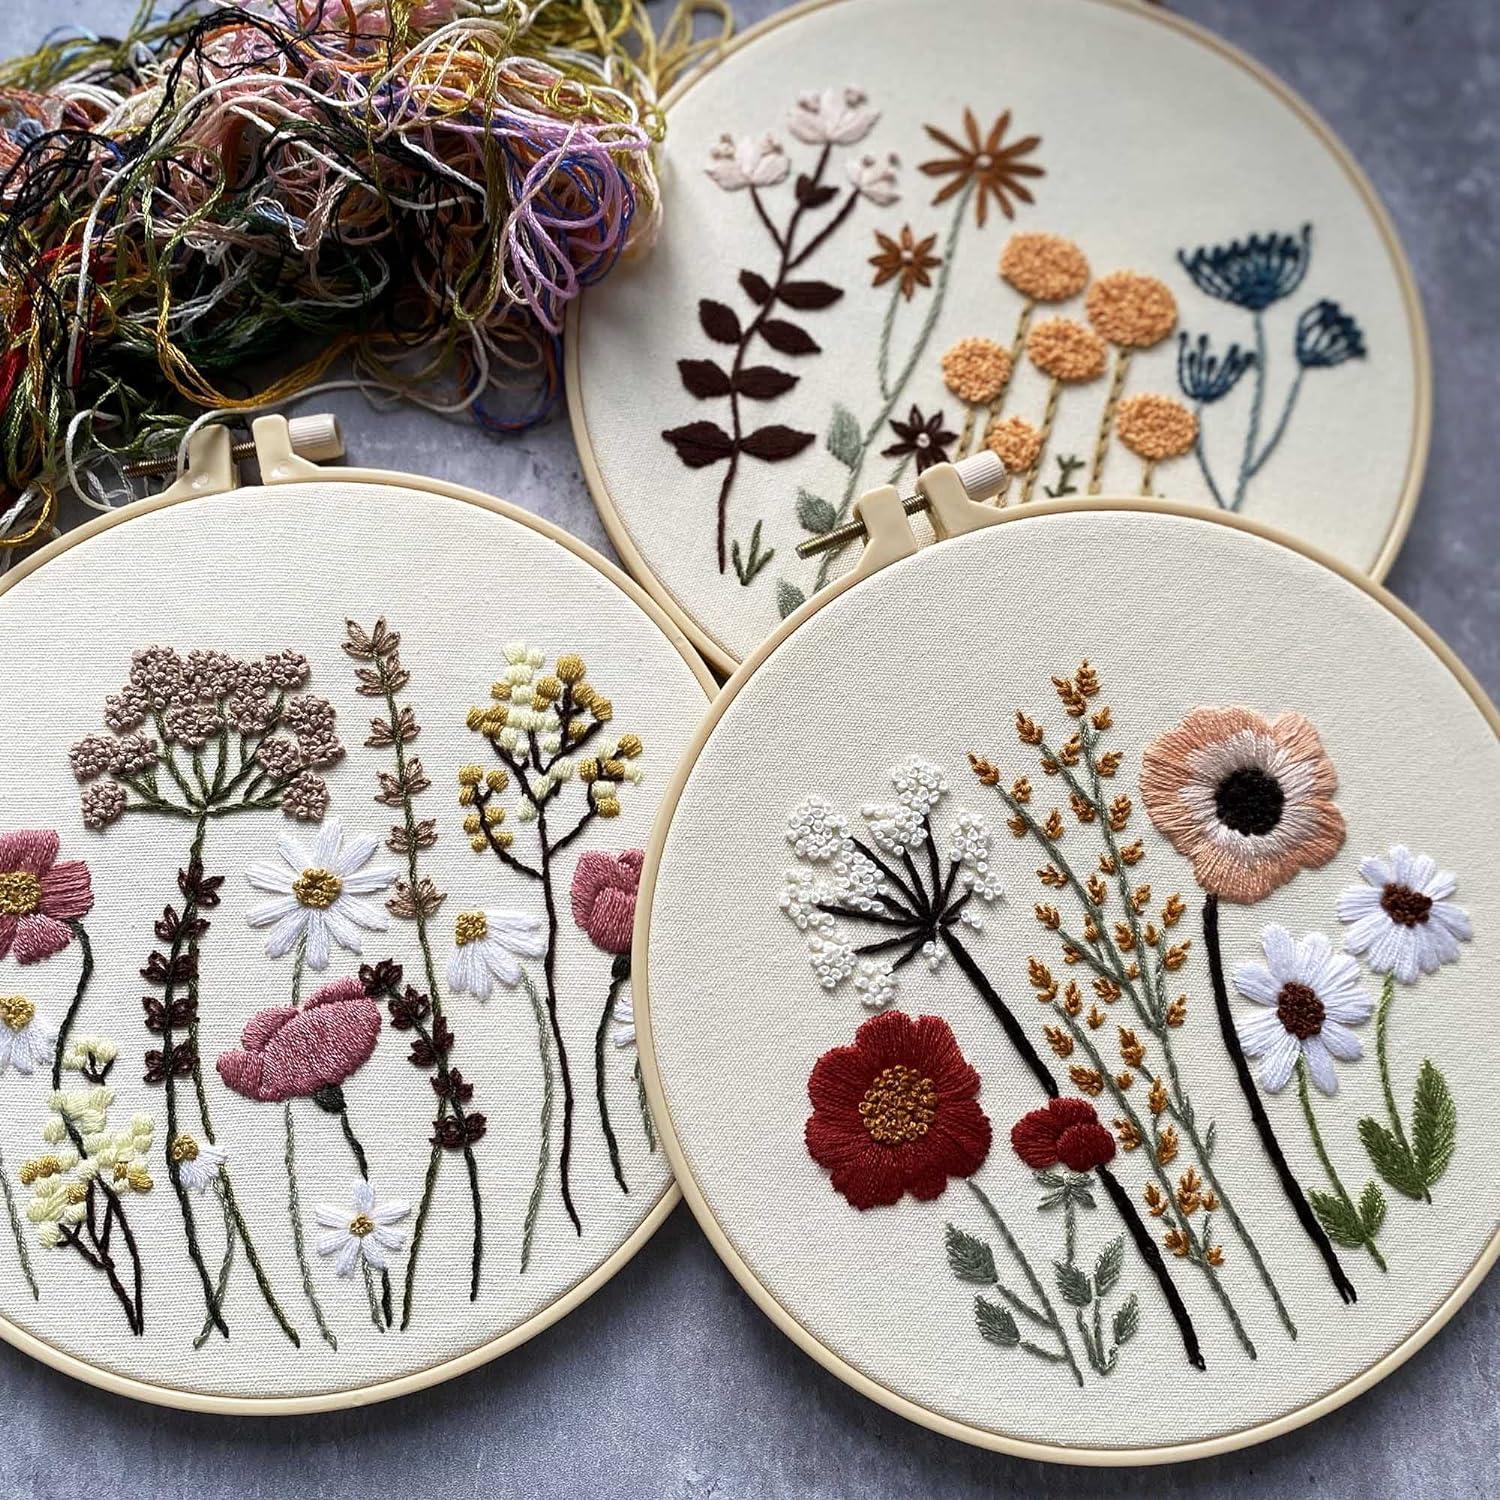 Bouquet Embroidery Patterns, Full Set of Hand-Made Stamped Embroidery Kits,  Cross Stitch Kits for Beginners (Floral)